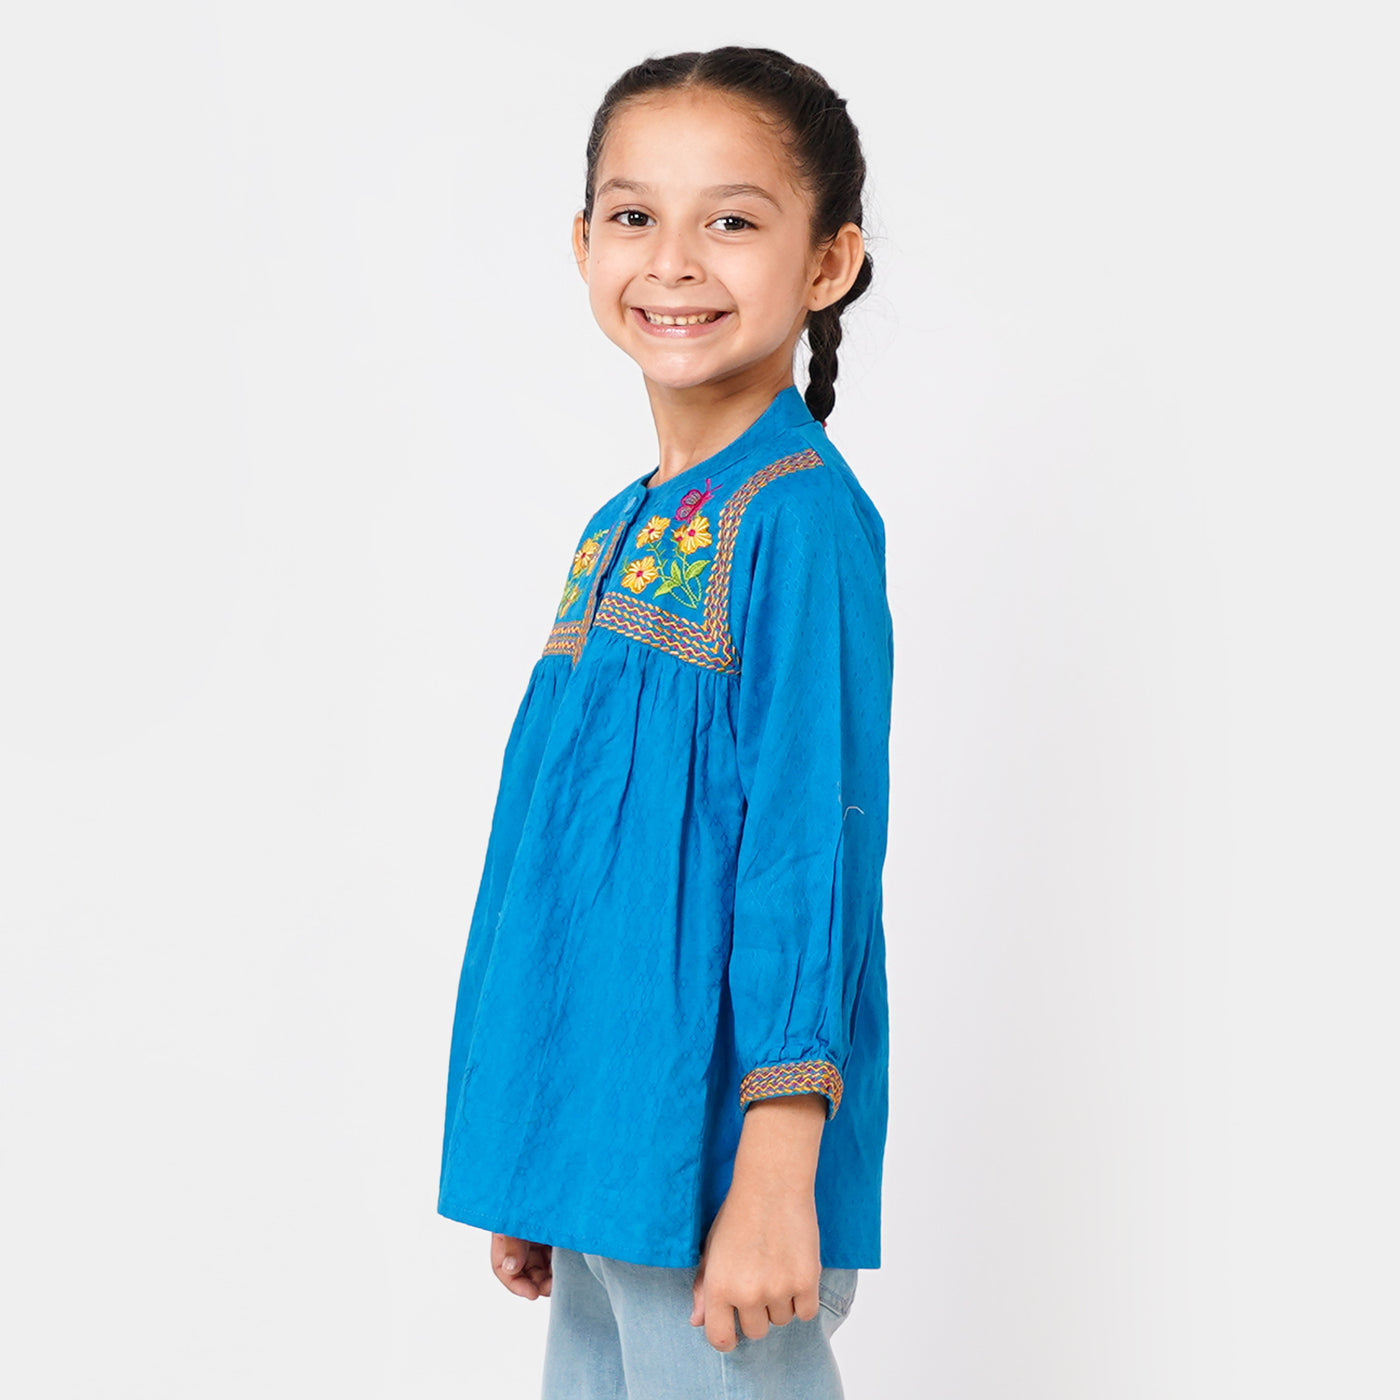 Girls Embroidered Top Bouquet - Blue